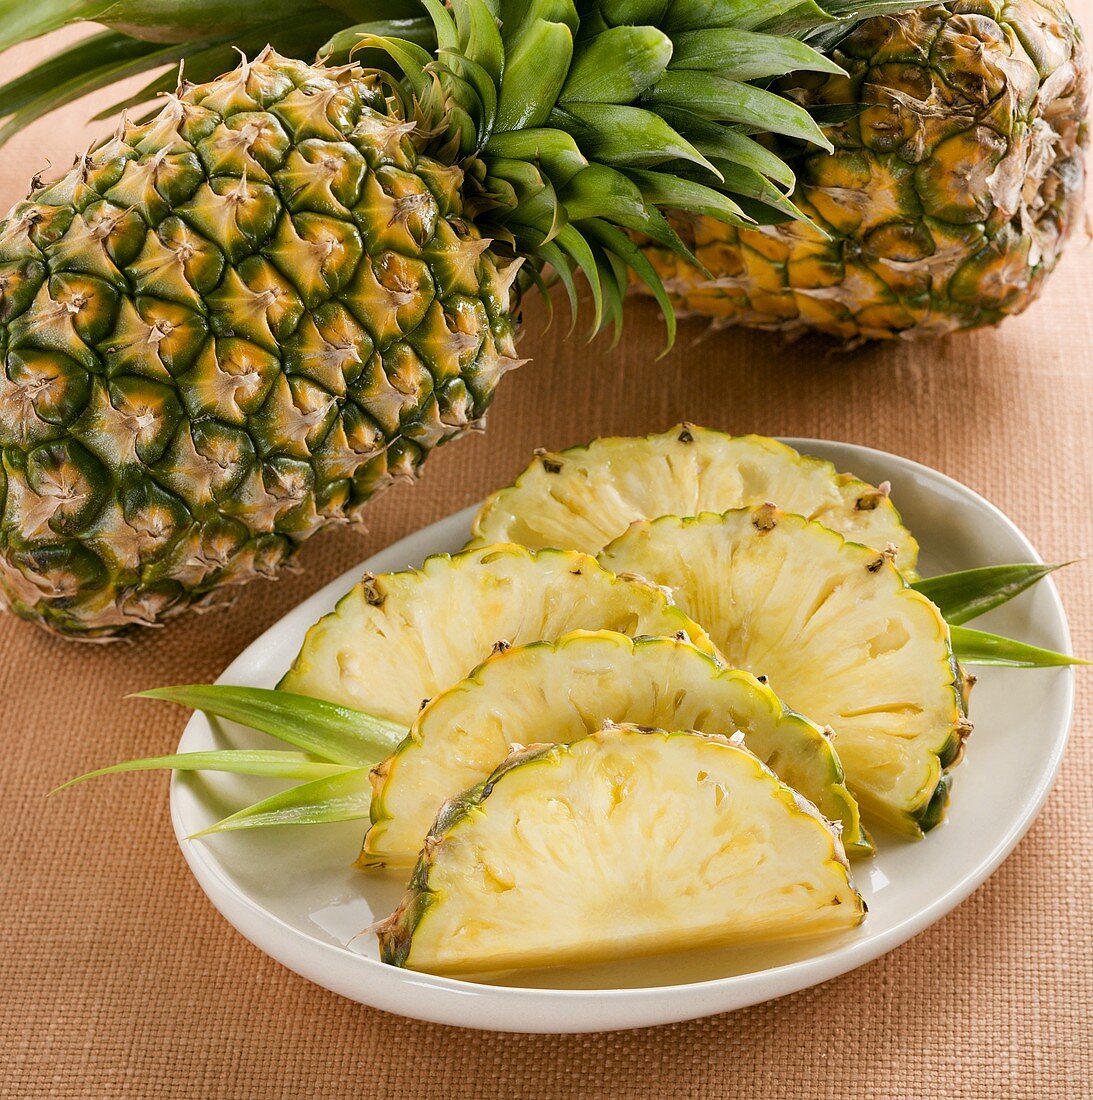 Fresh Pineapple Slices on a Plate, Whole Pineapple